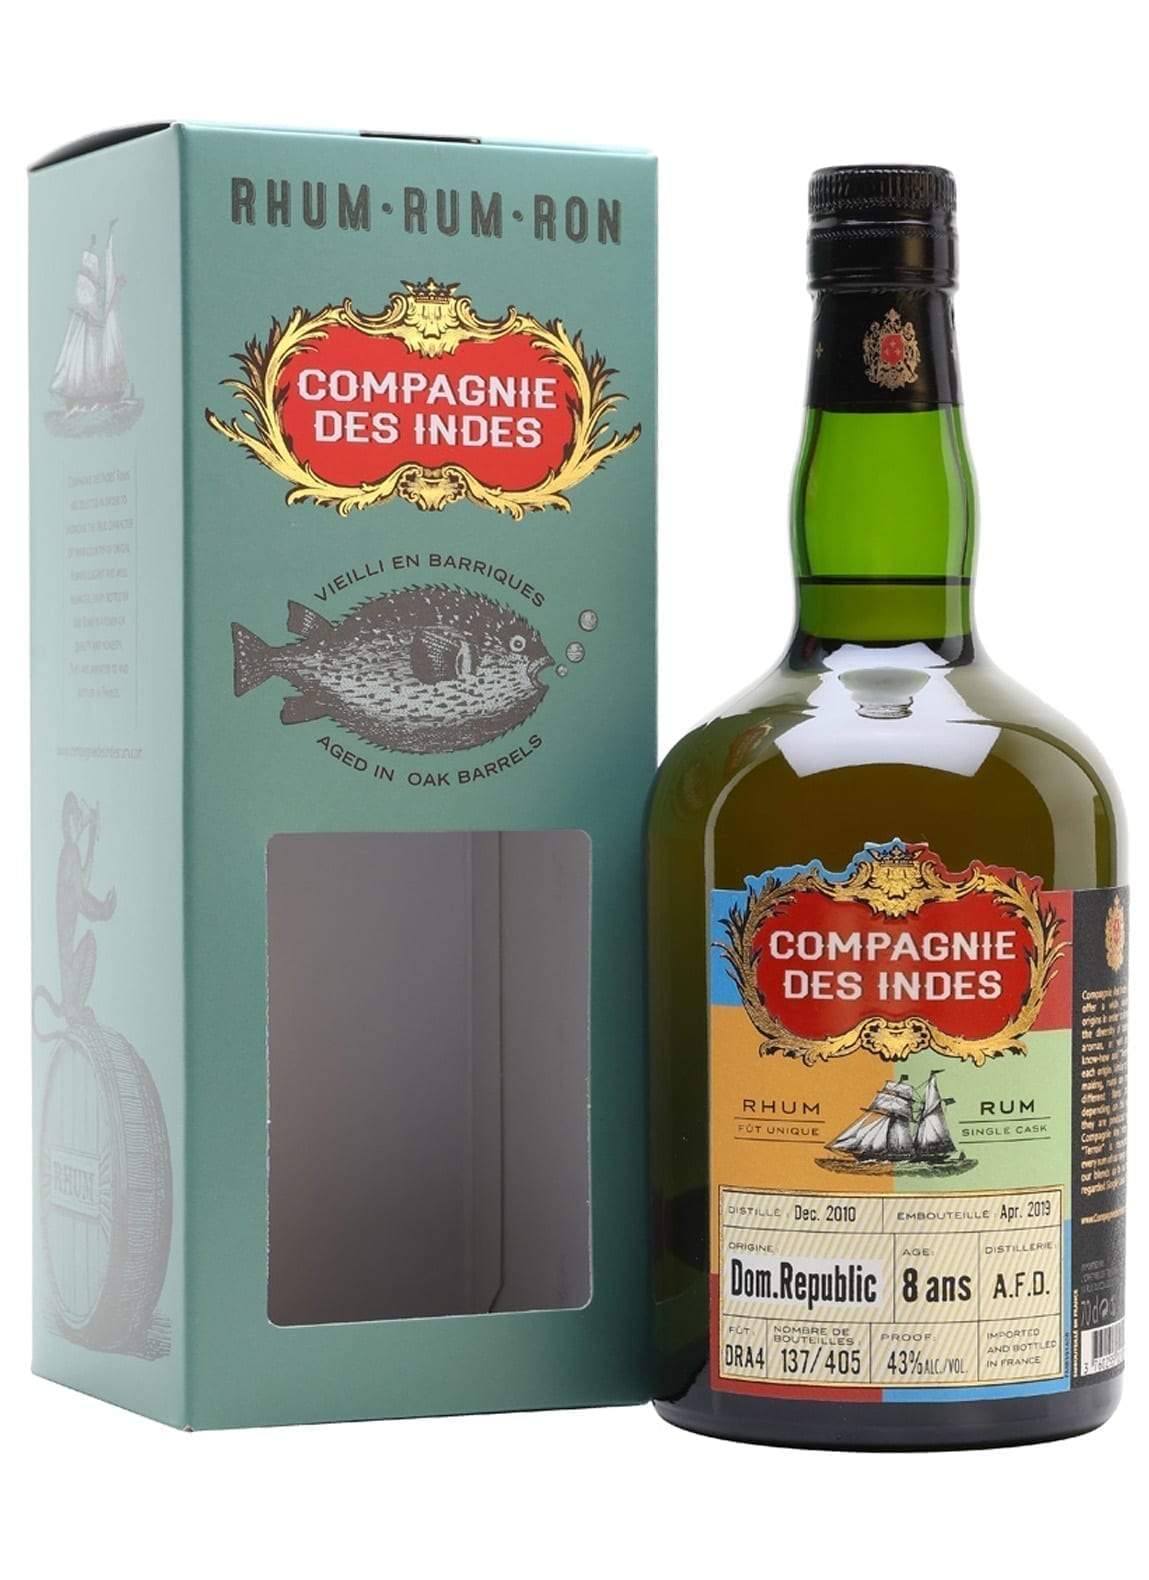 Compagnie des Indes Rum Dominican Republic 8 years 43% 700ml | Rum | Shop online at Spirits of France